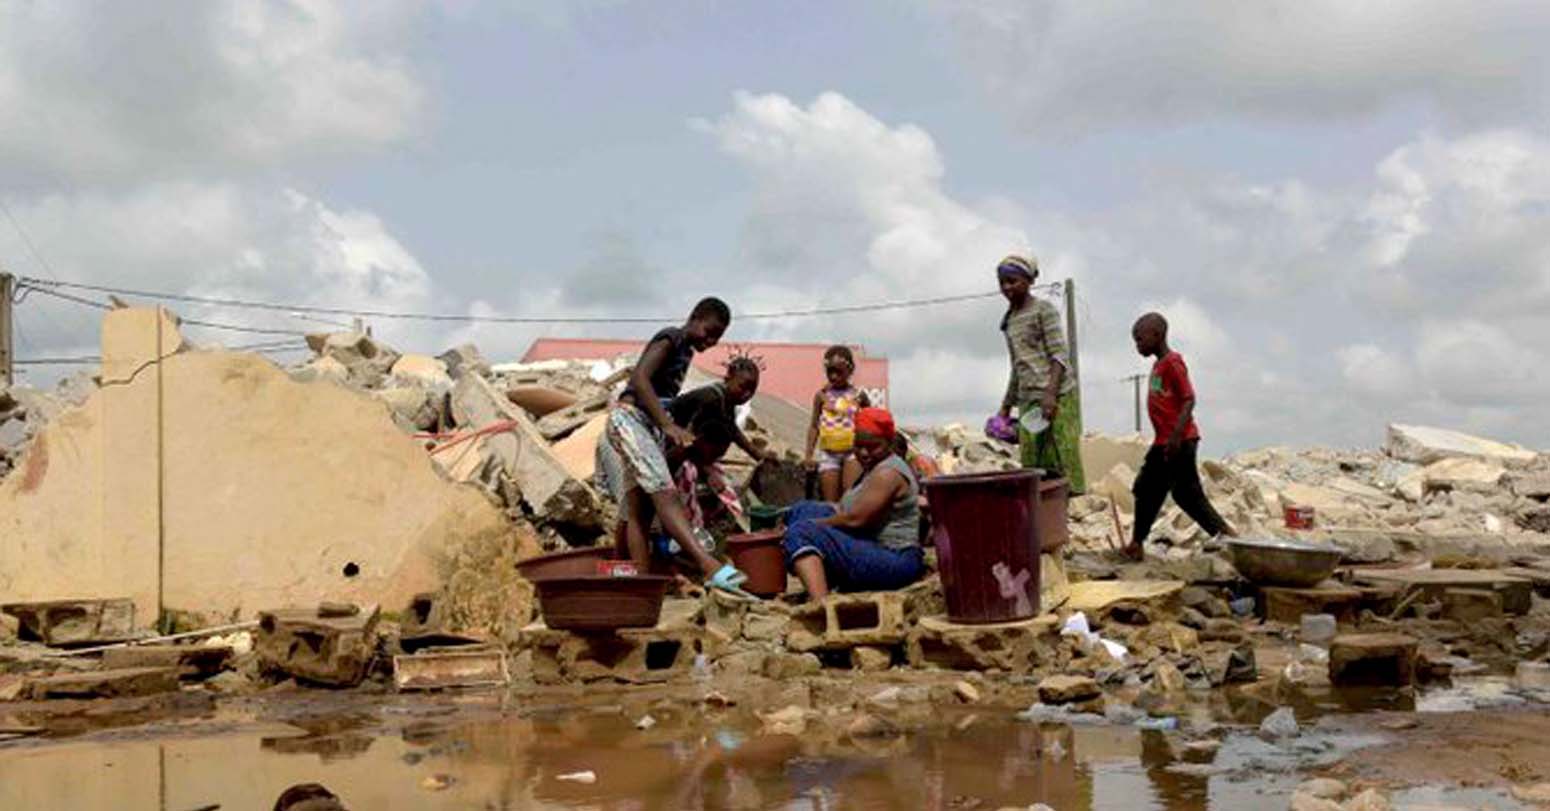 Thousands Are Homeless As Houses Are Demolished In Ivory Coast’s Main City. Here's why